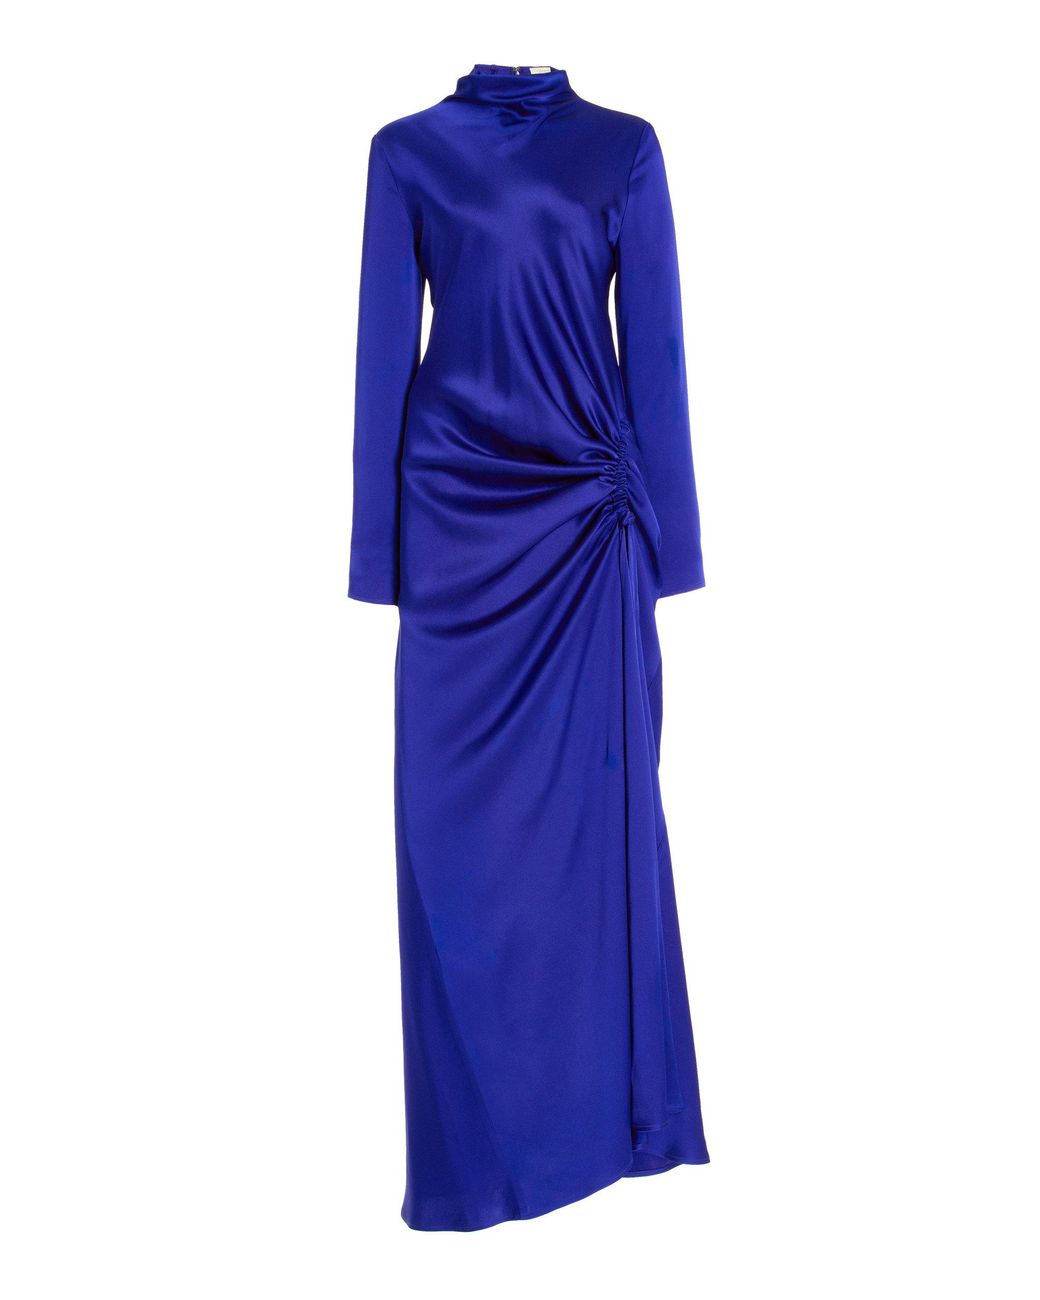 LAPOINTE Gathered Satin Gown in Blue | Lyst